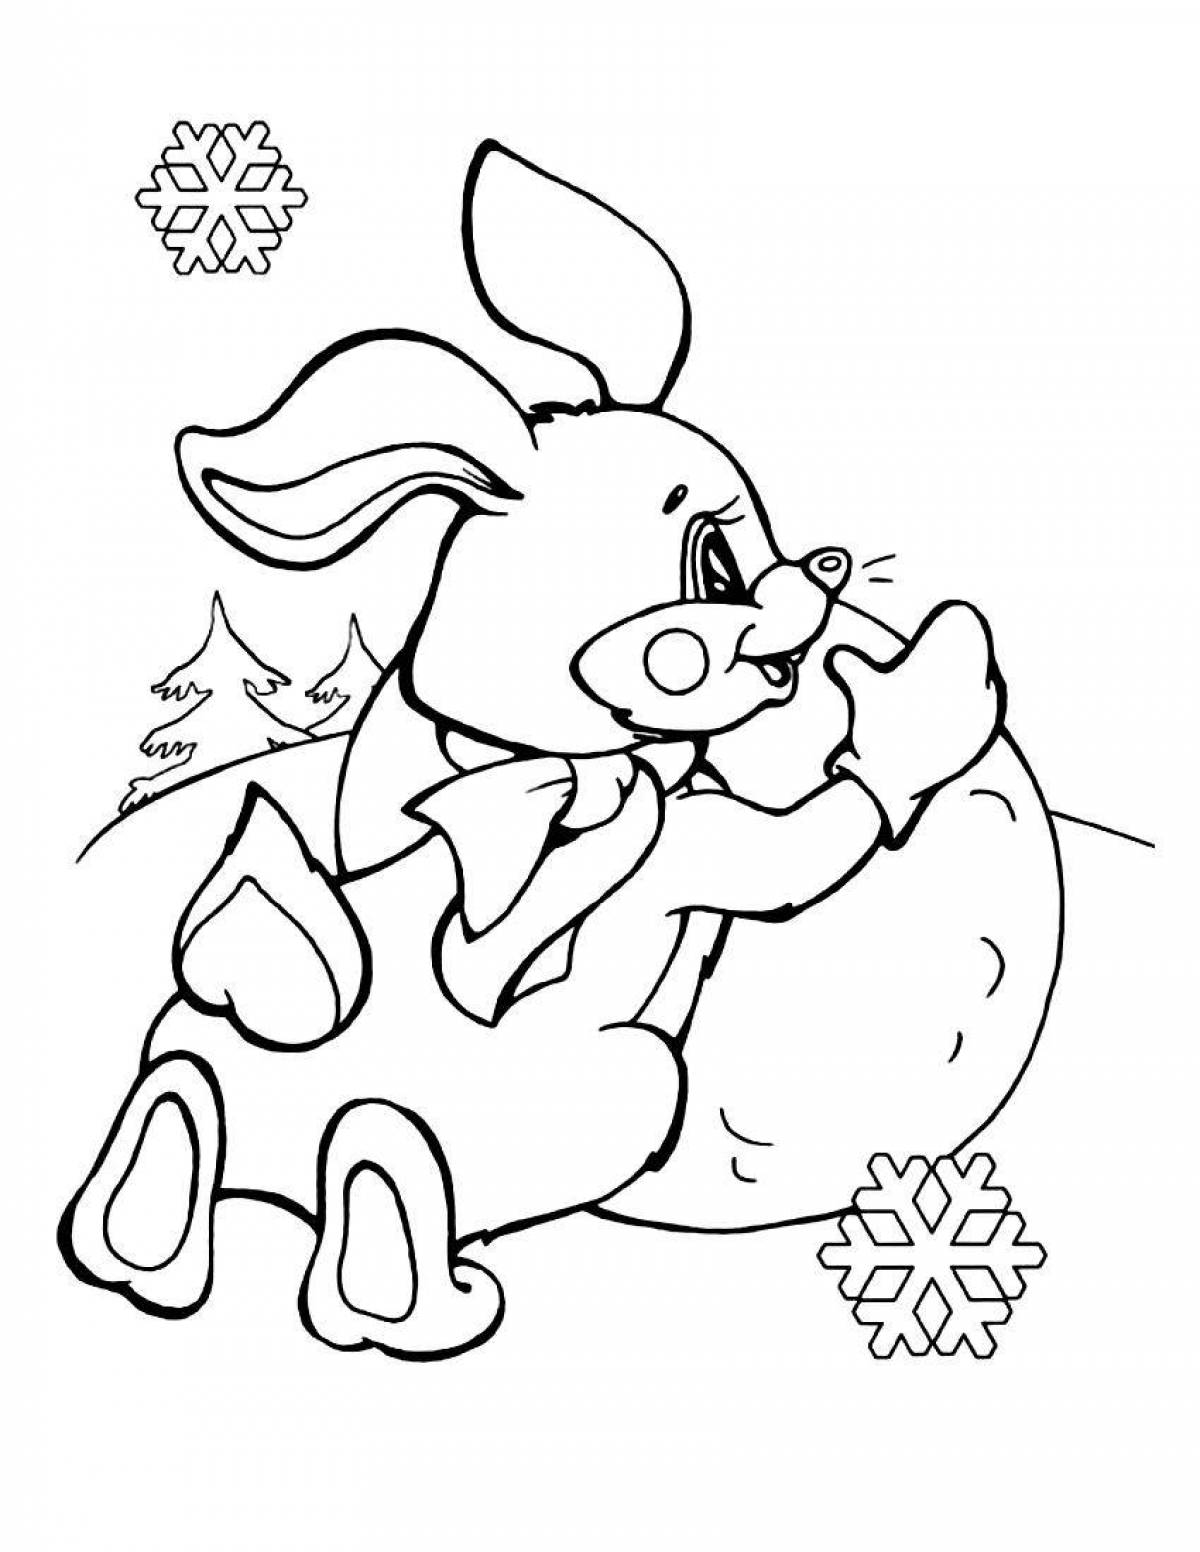 Happy year of the rabbit coloring book